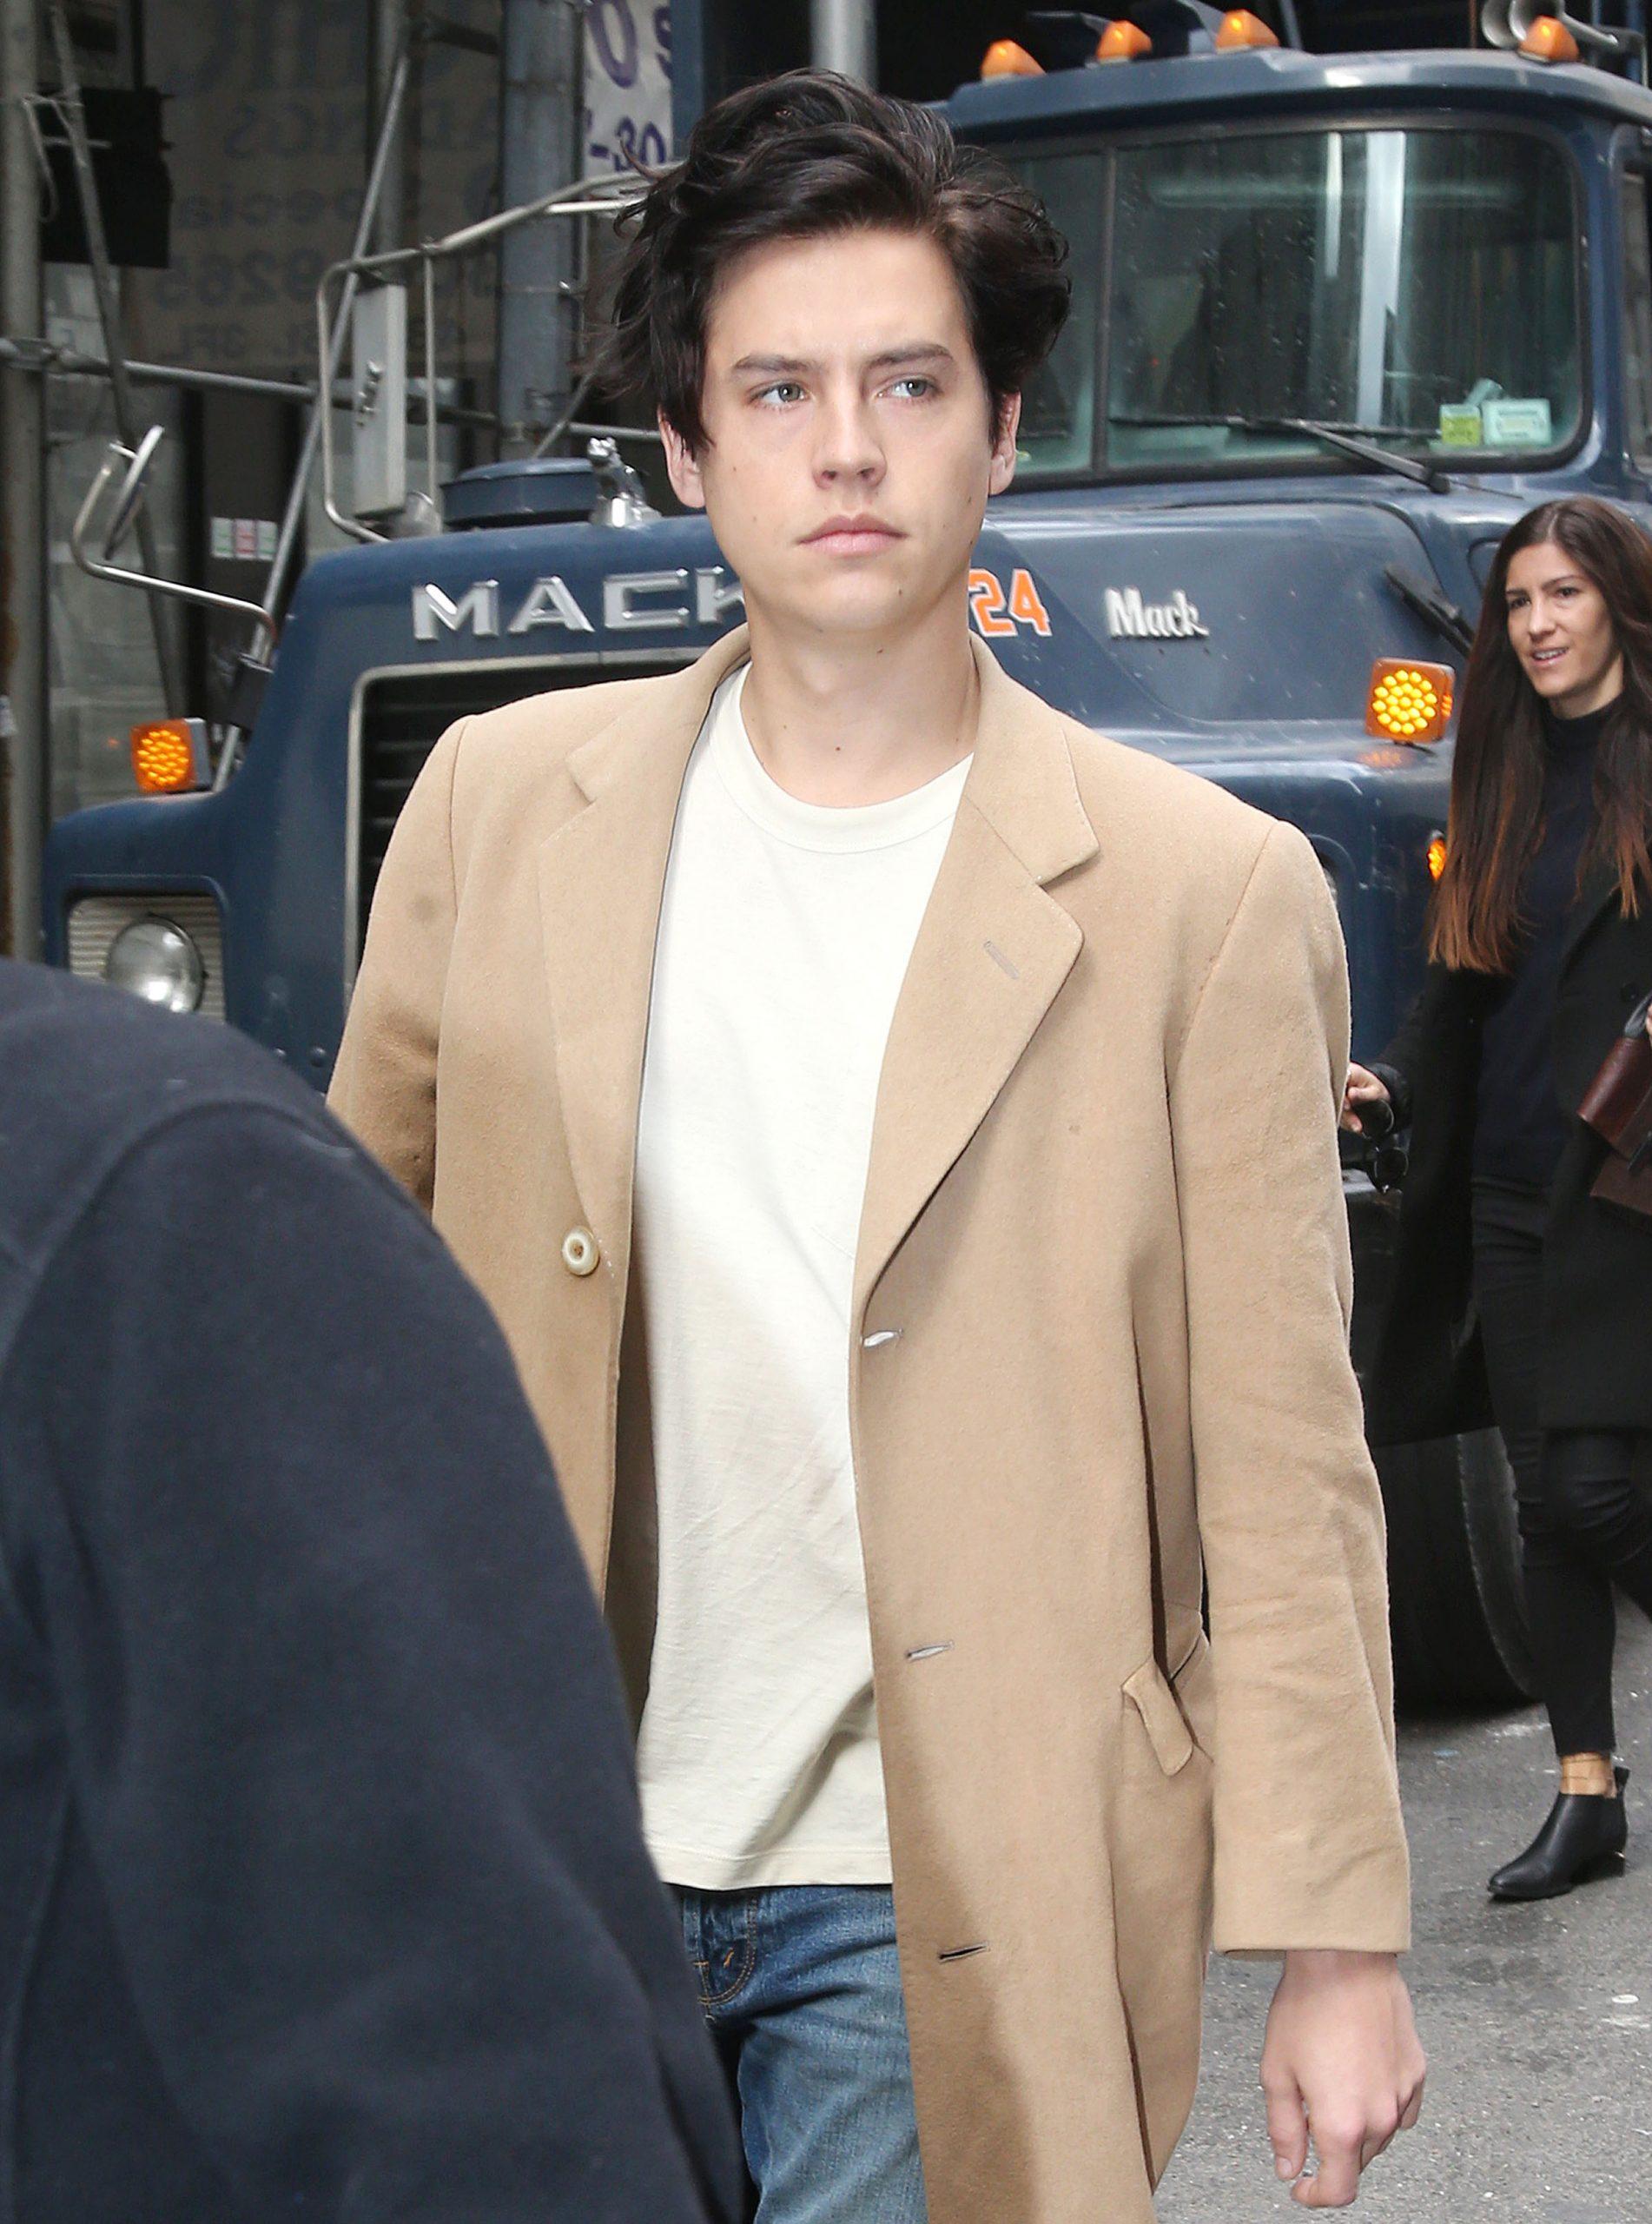 Cole Sprouse Details Trauma He & Former Disney Channel Stars Endured